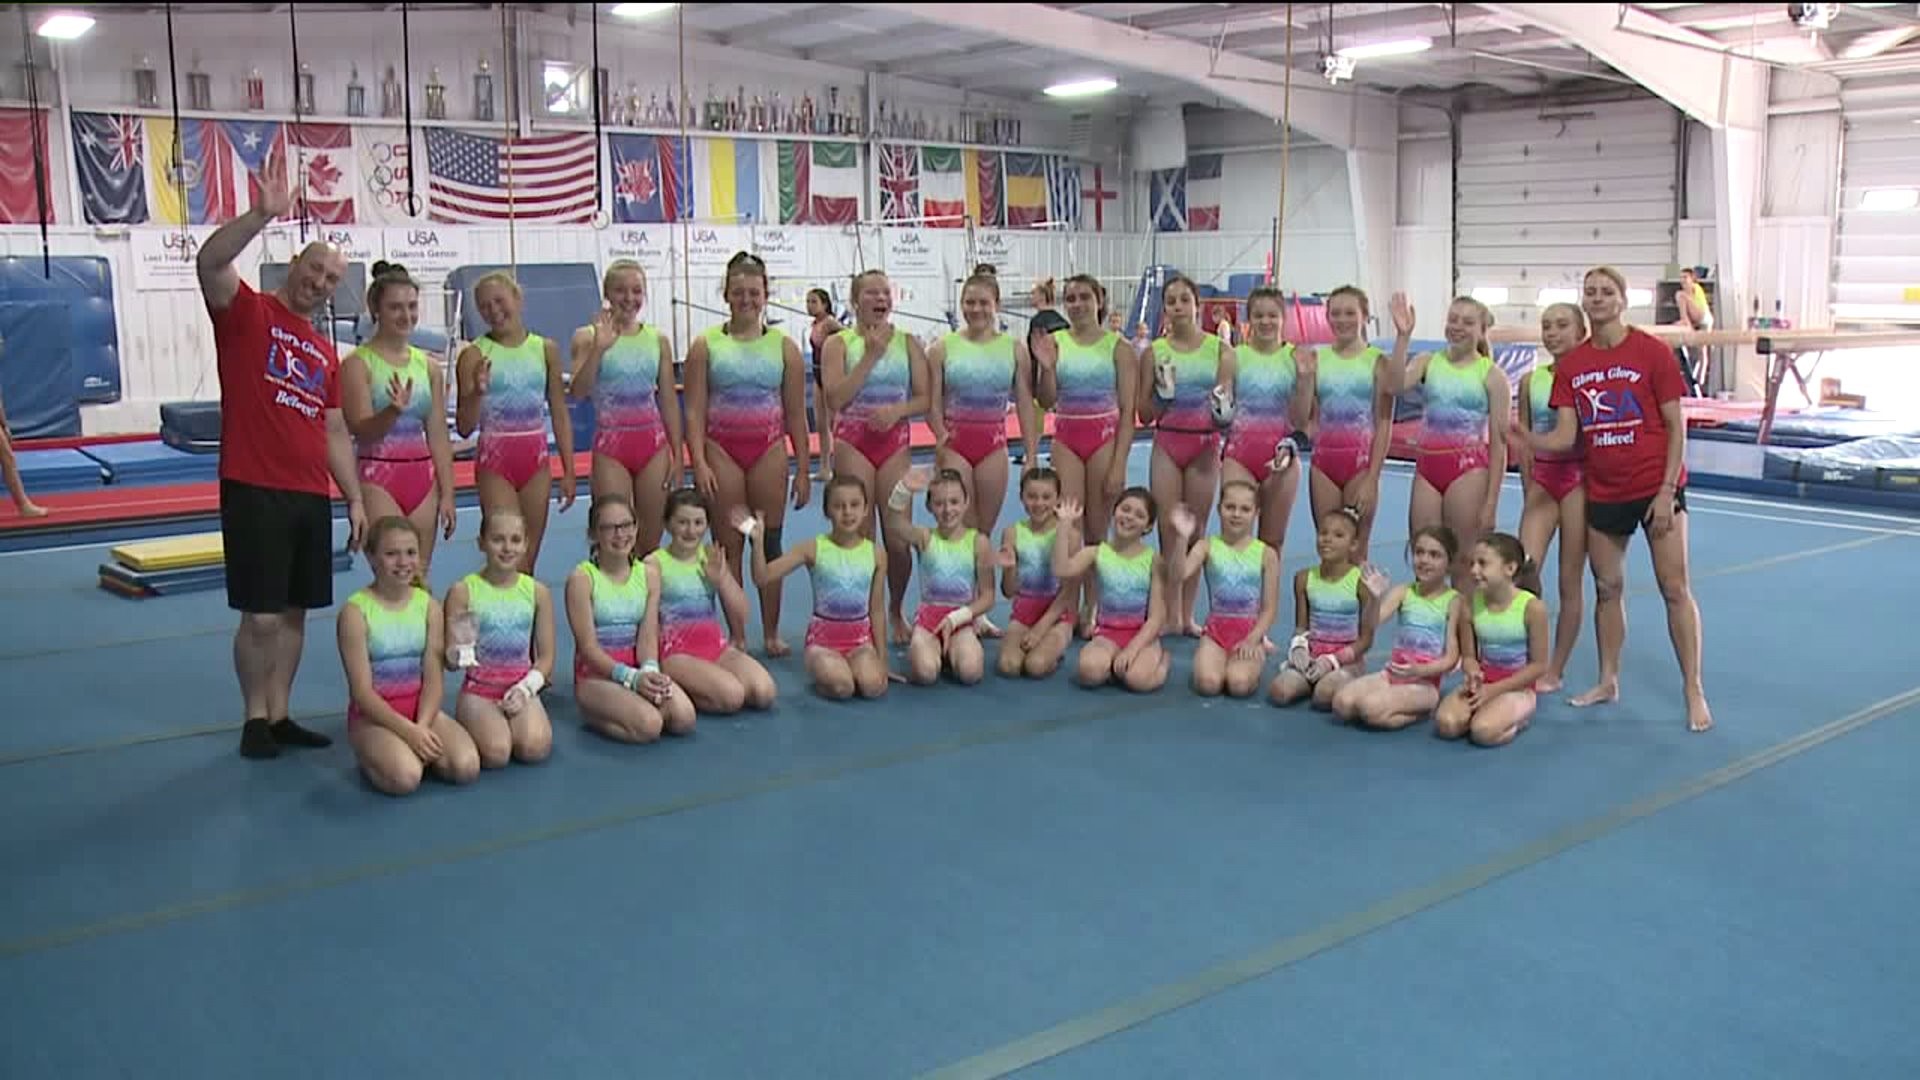 United Sports Academy In Dunmore Sending 24 Gymnasts To The World Championships